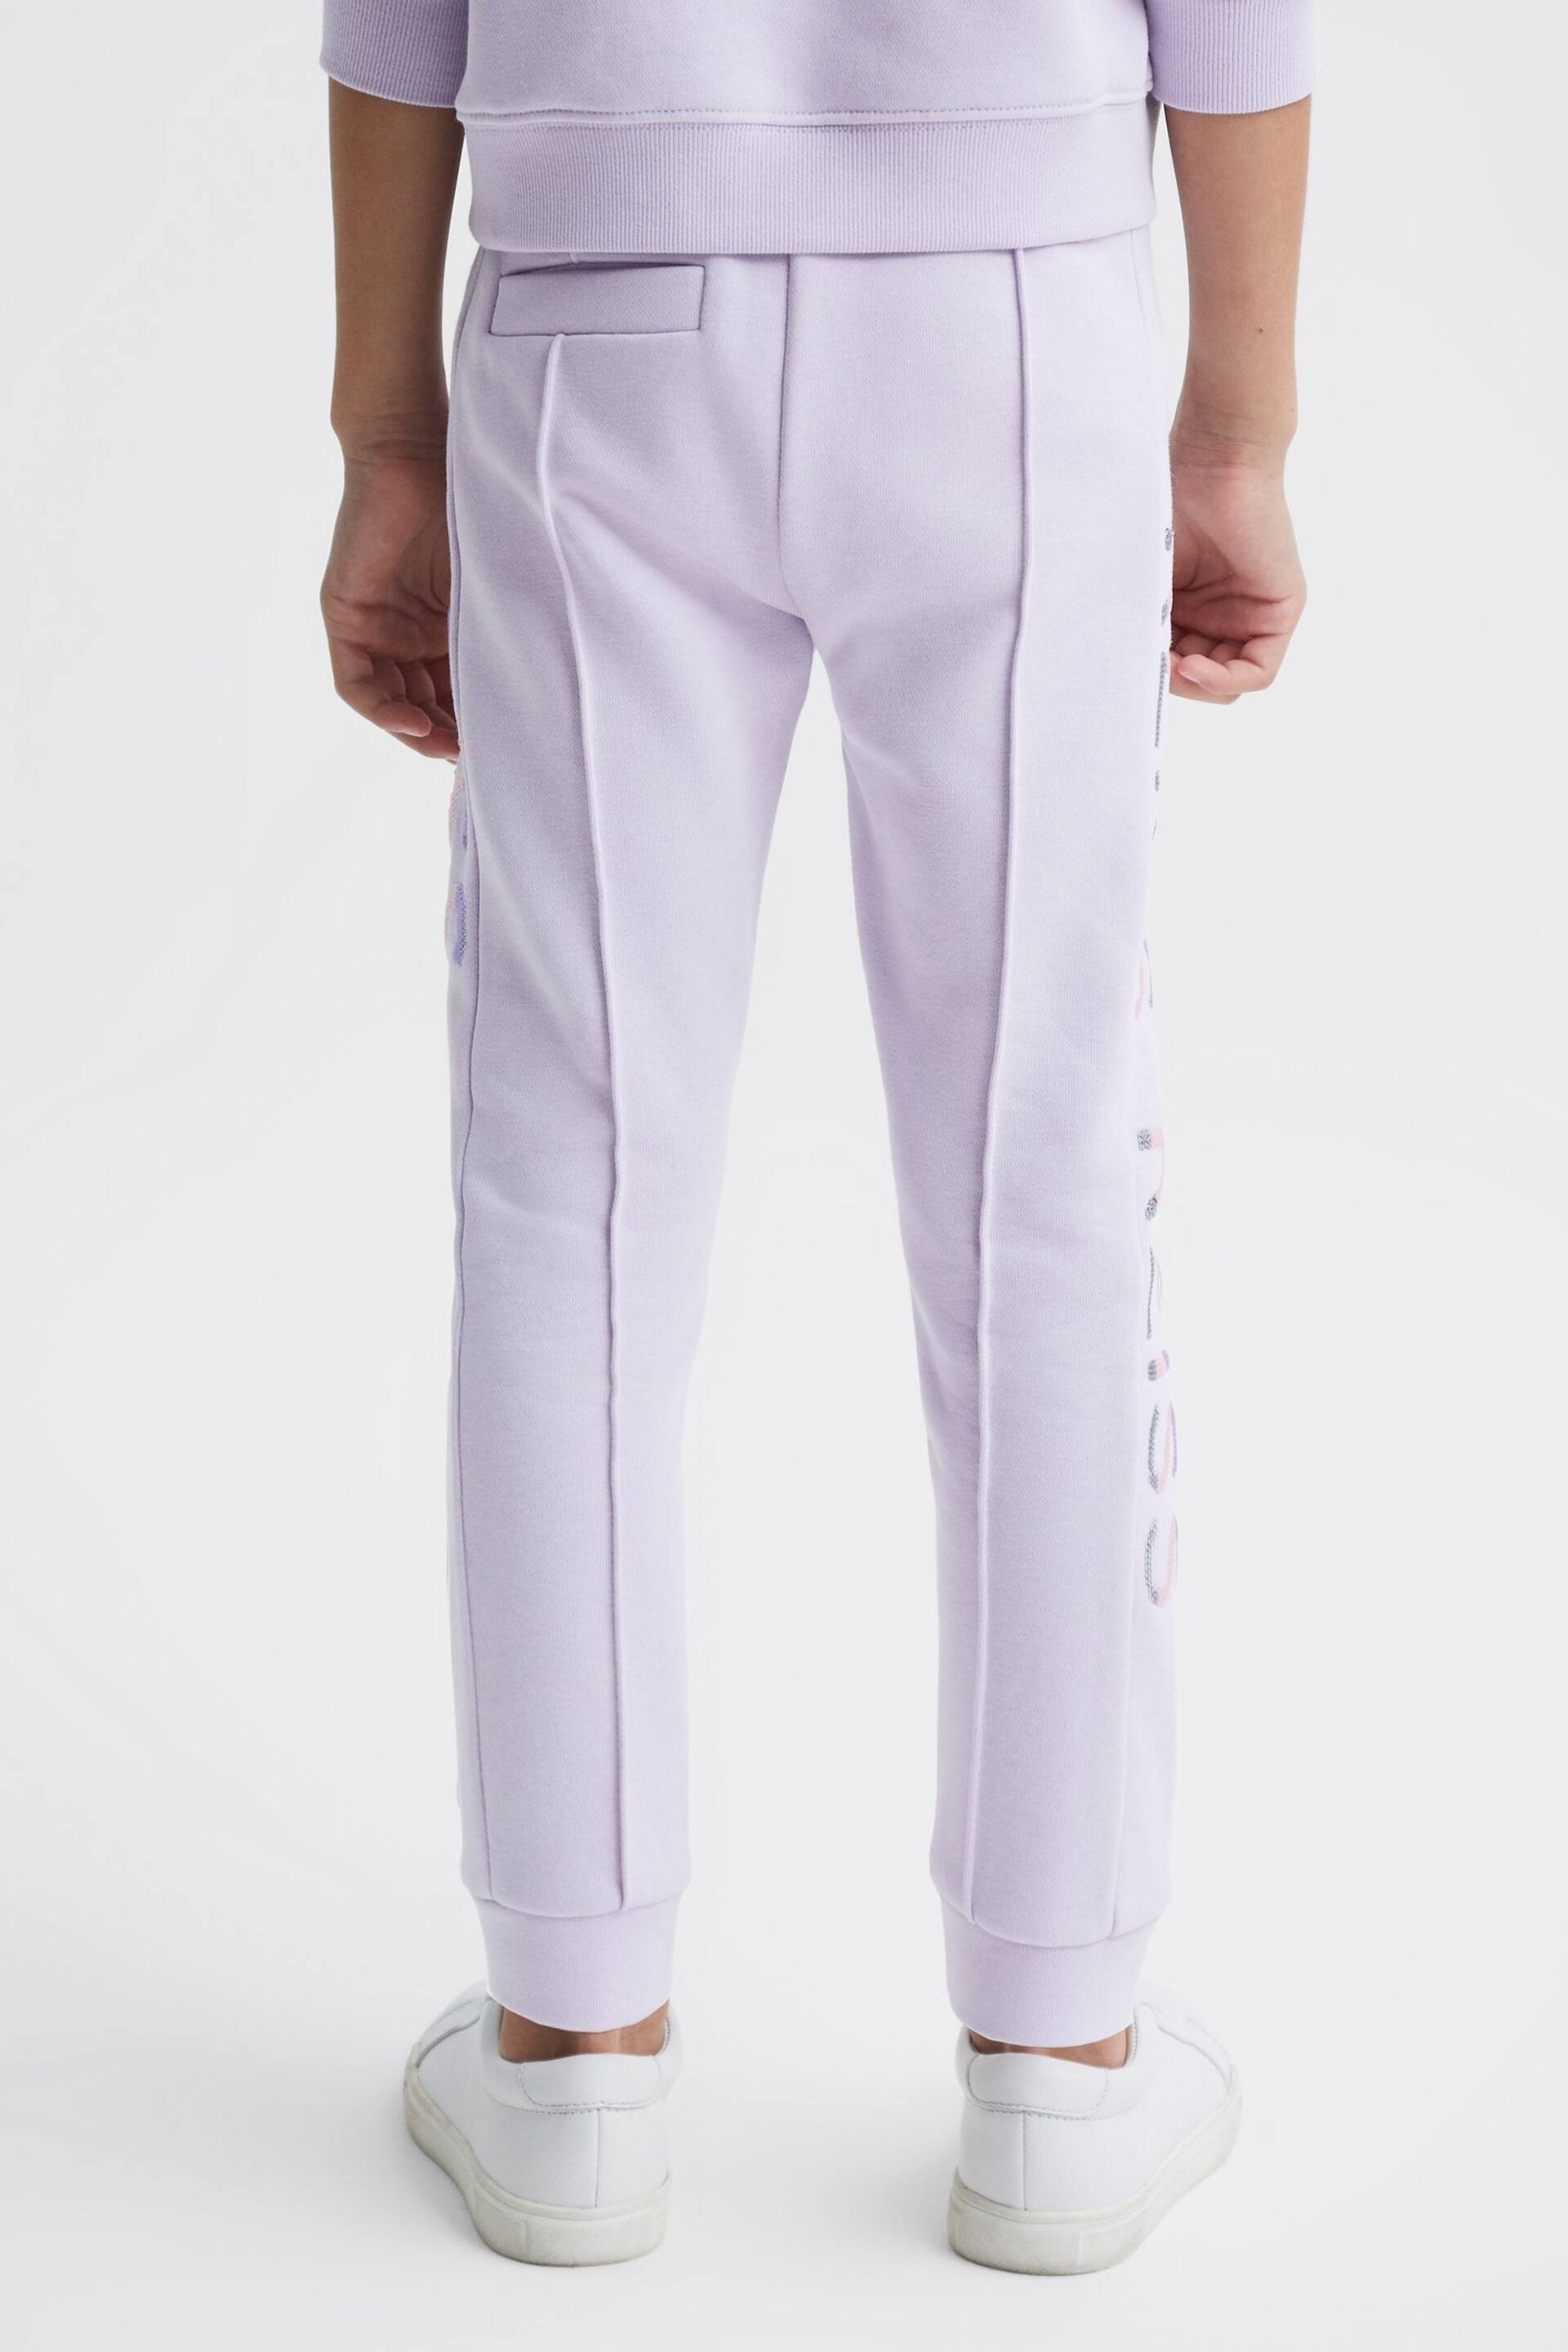 Reiss Lilac Maria Senior Sequin Joggers - Image 5 of 7